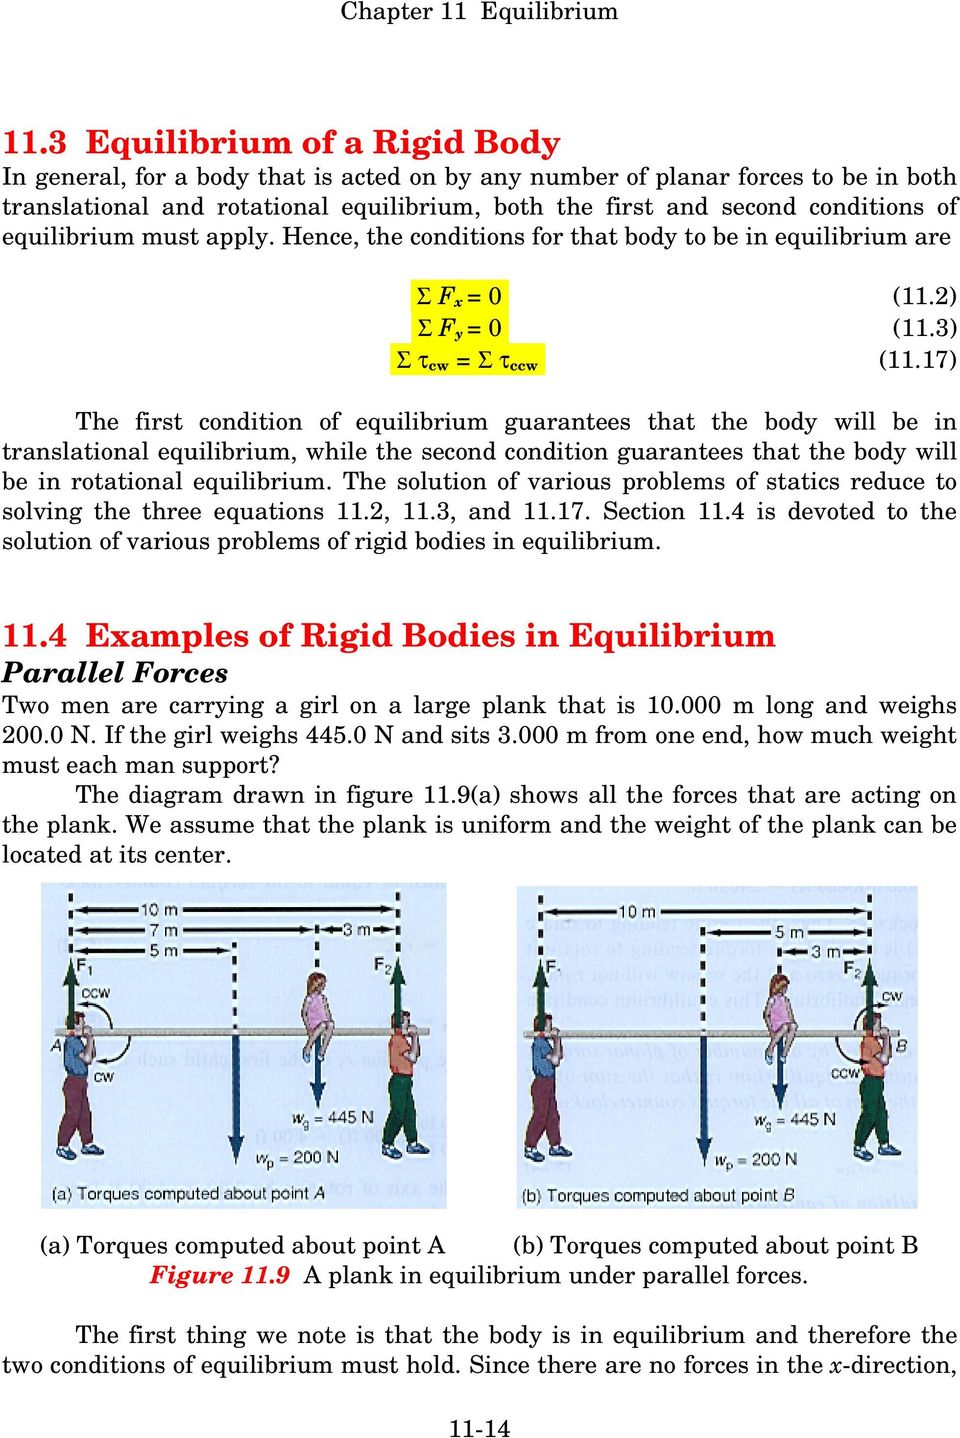 17) The first condition of equilibrium guarantees that the body will be in translational equilibrium, while the second condition guarantees that the body will be in rotational equilibrium.